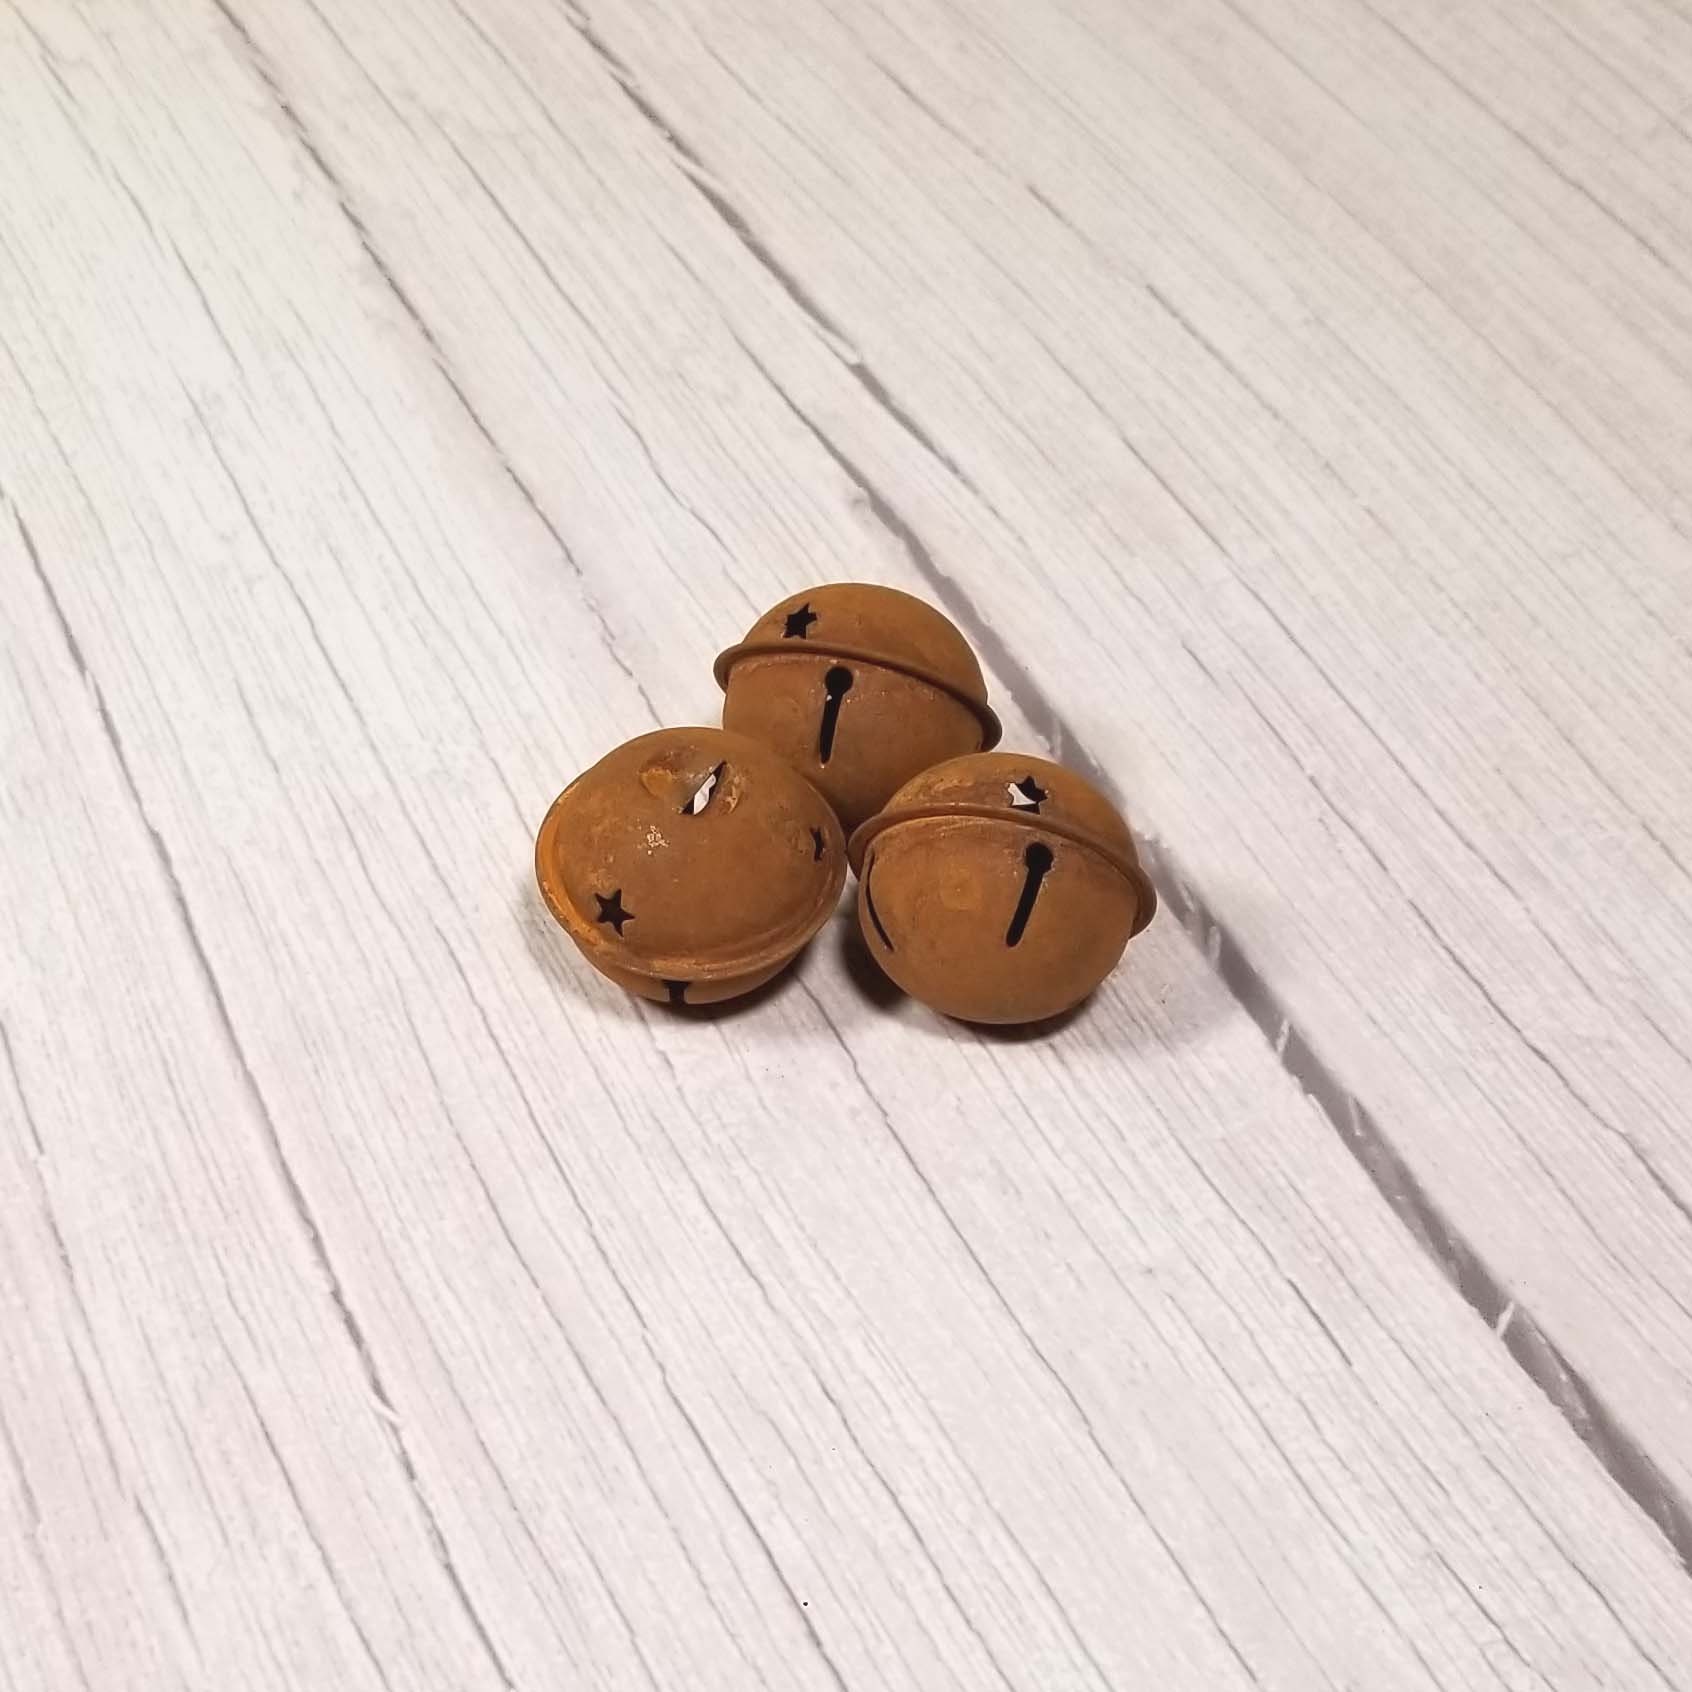  HAPPY DEALS ~ Set of 3, Large 80MM Rusty Jingle Bells with Star  Cutouts, 3.25 inch